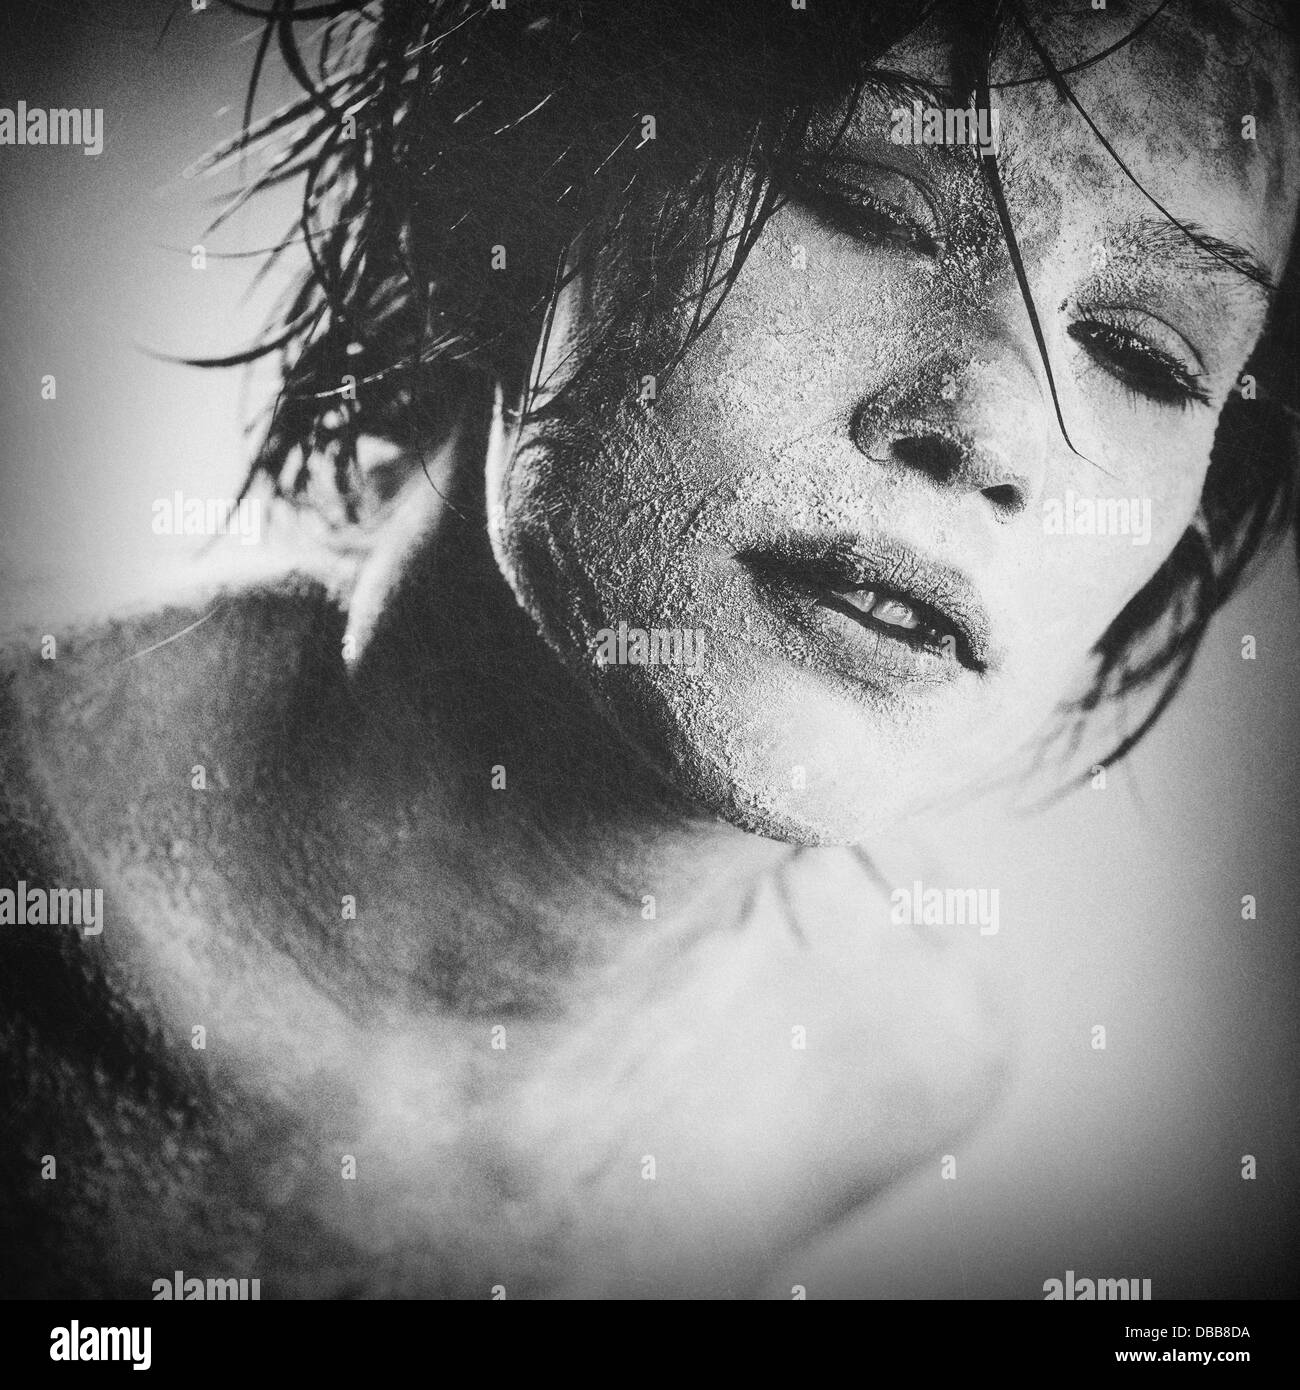 Zombie, grungy female portrait with added scratched texture Stock Photo